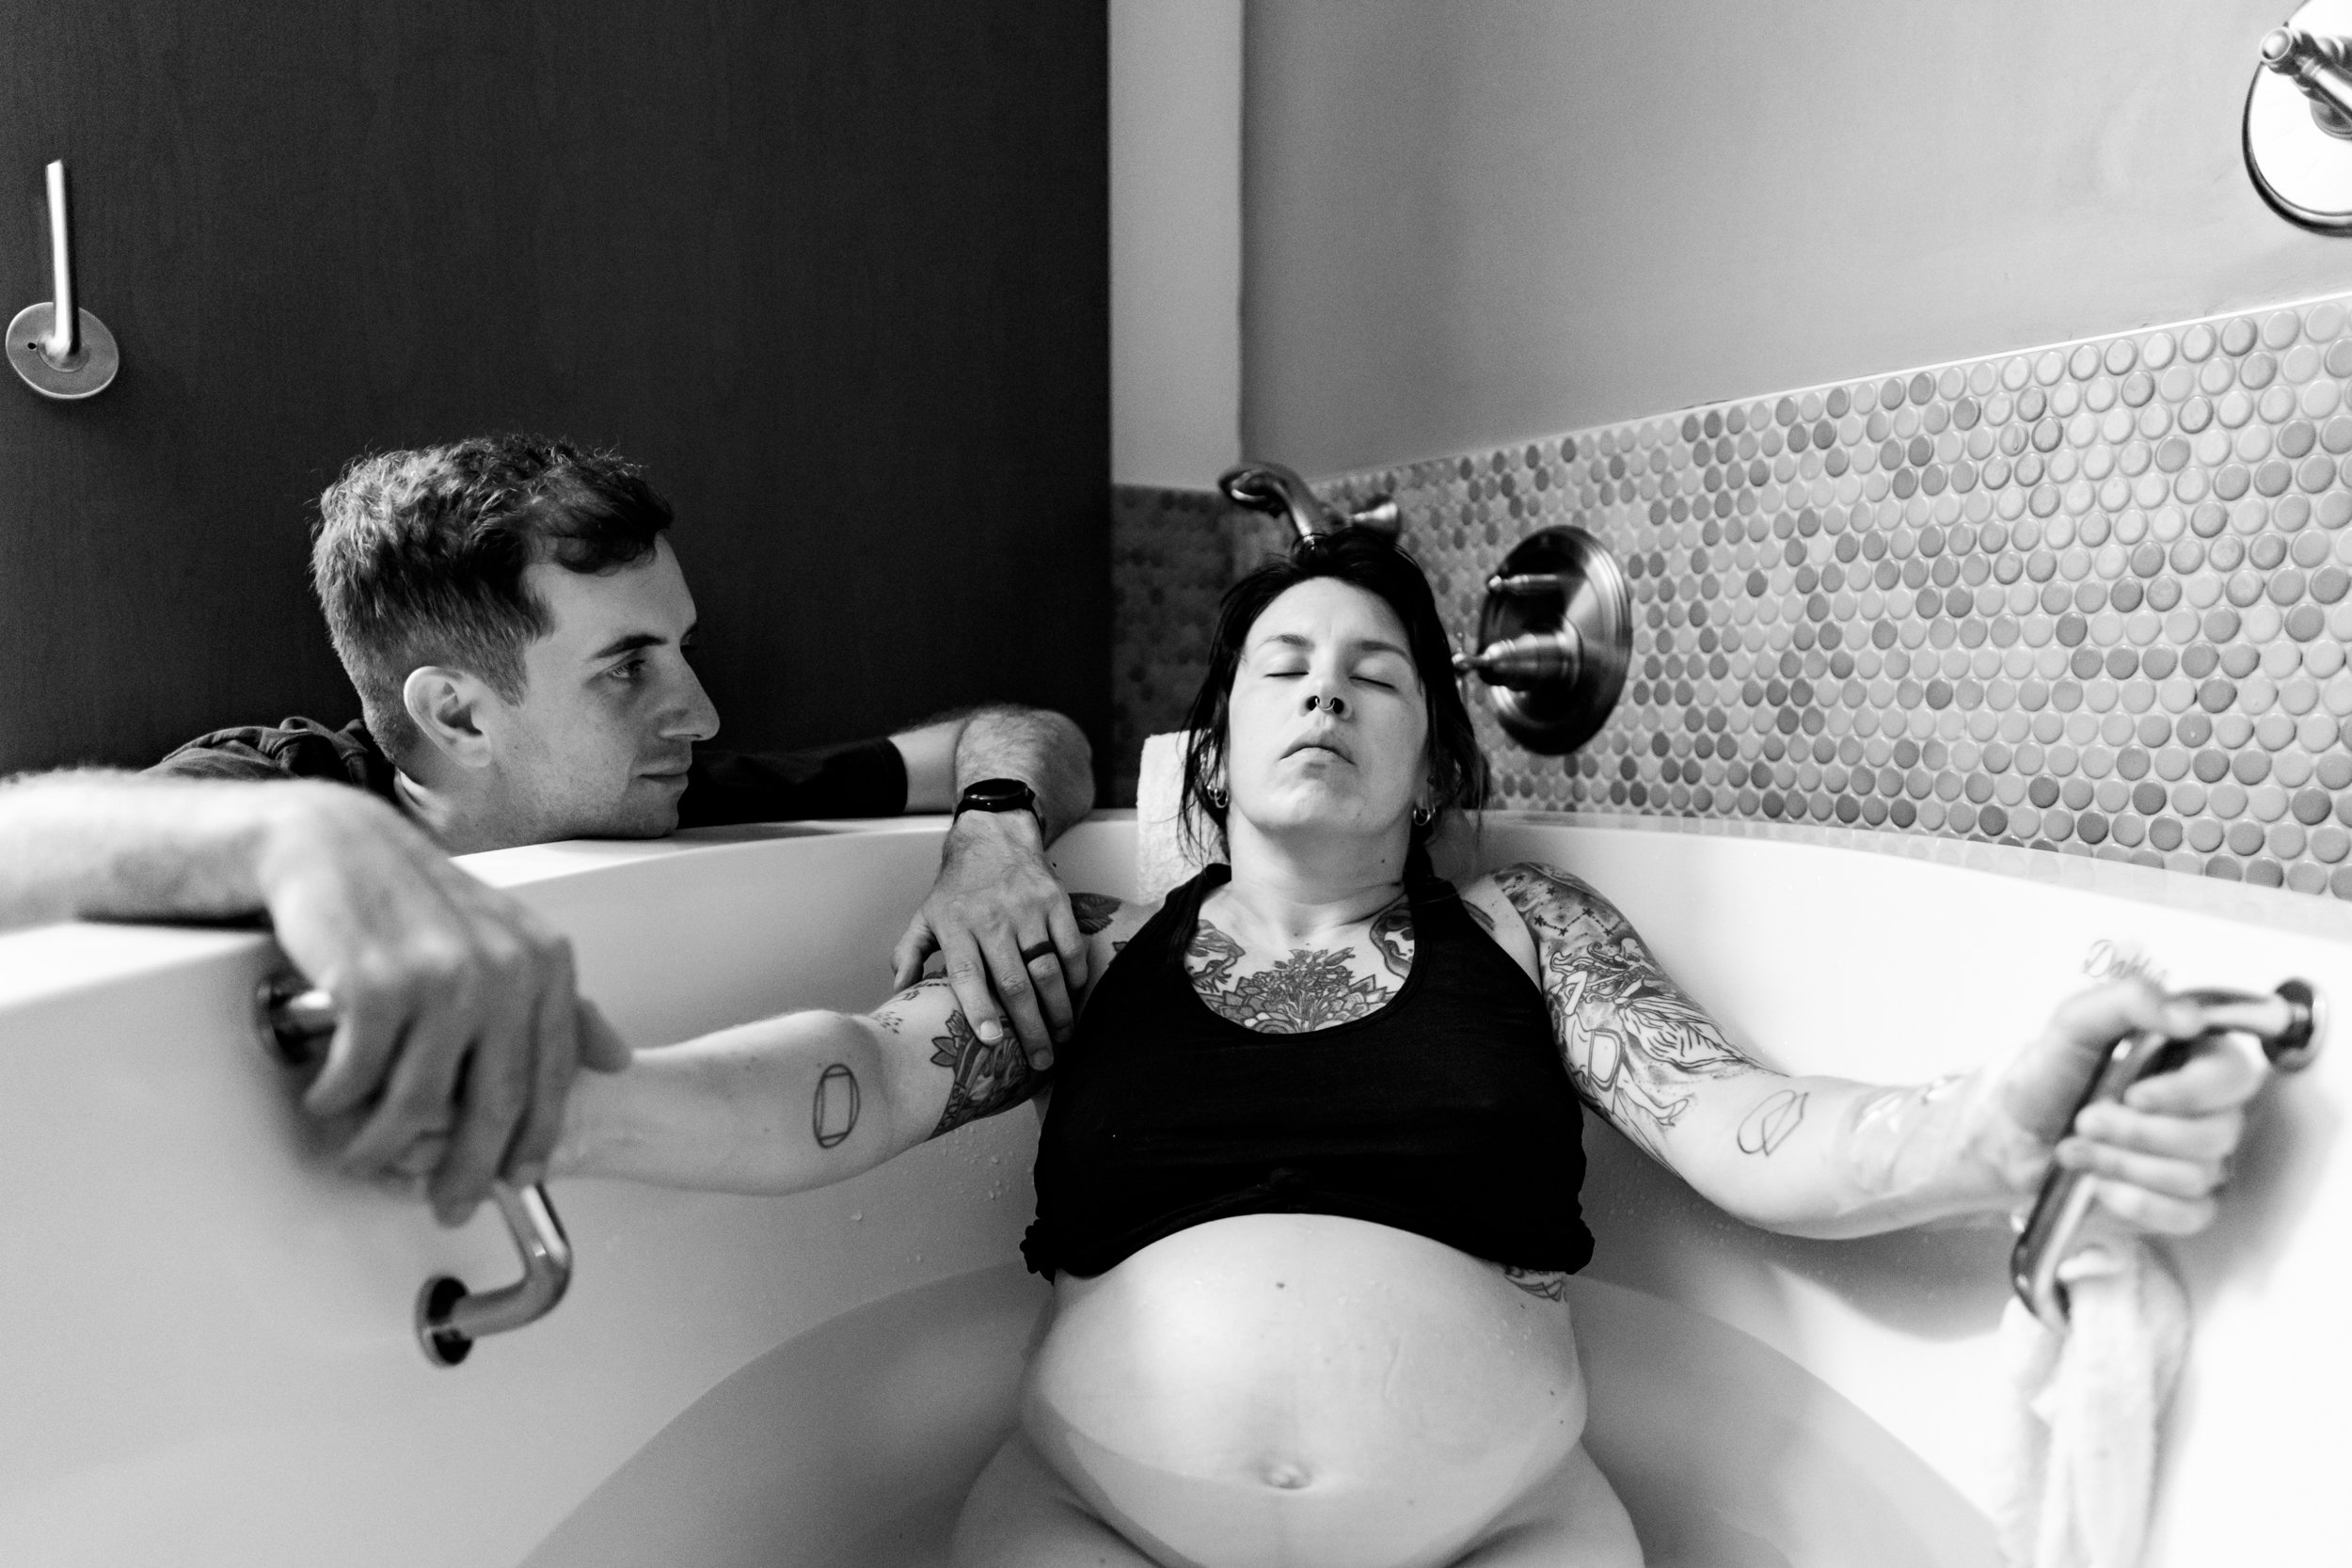 laboring mom holding onto tub handle while her husband looks on